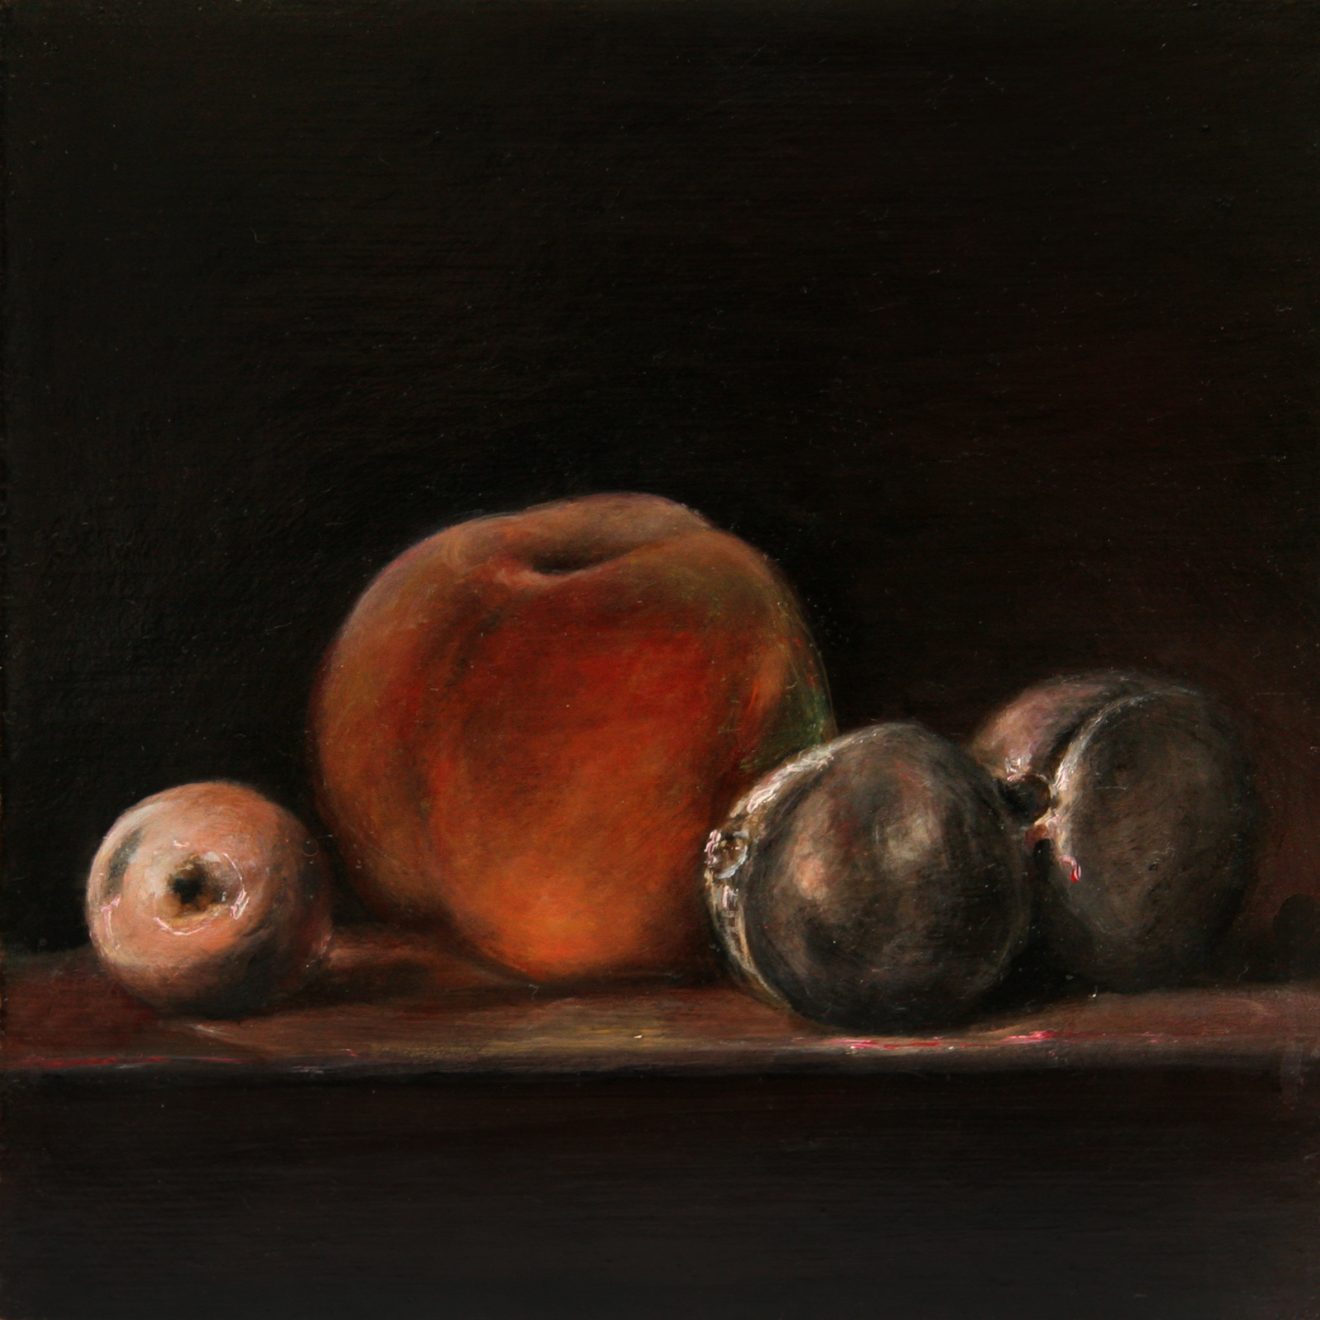 Peaches and Plums on a Bench (after Chardin) Oil on Canvas 18x18cm 2012